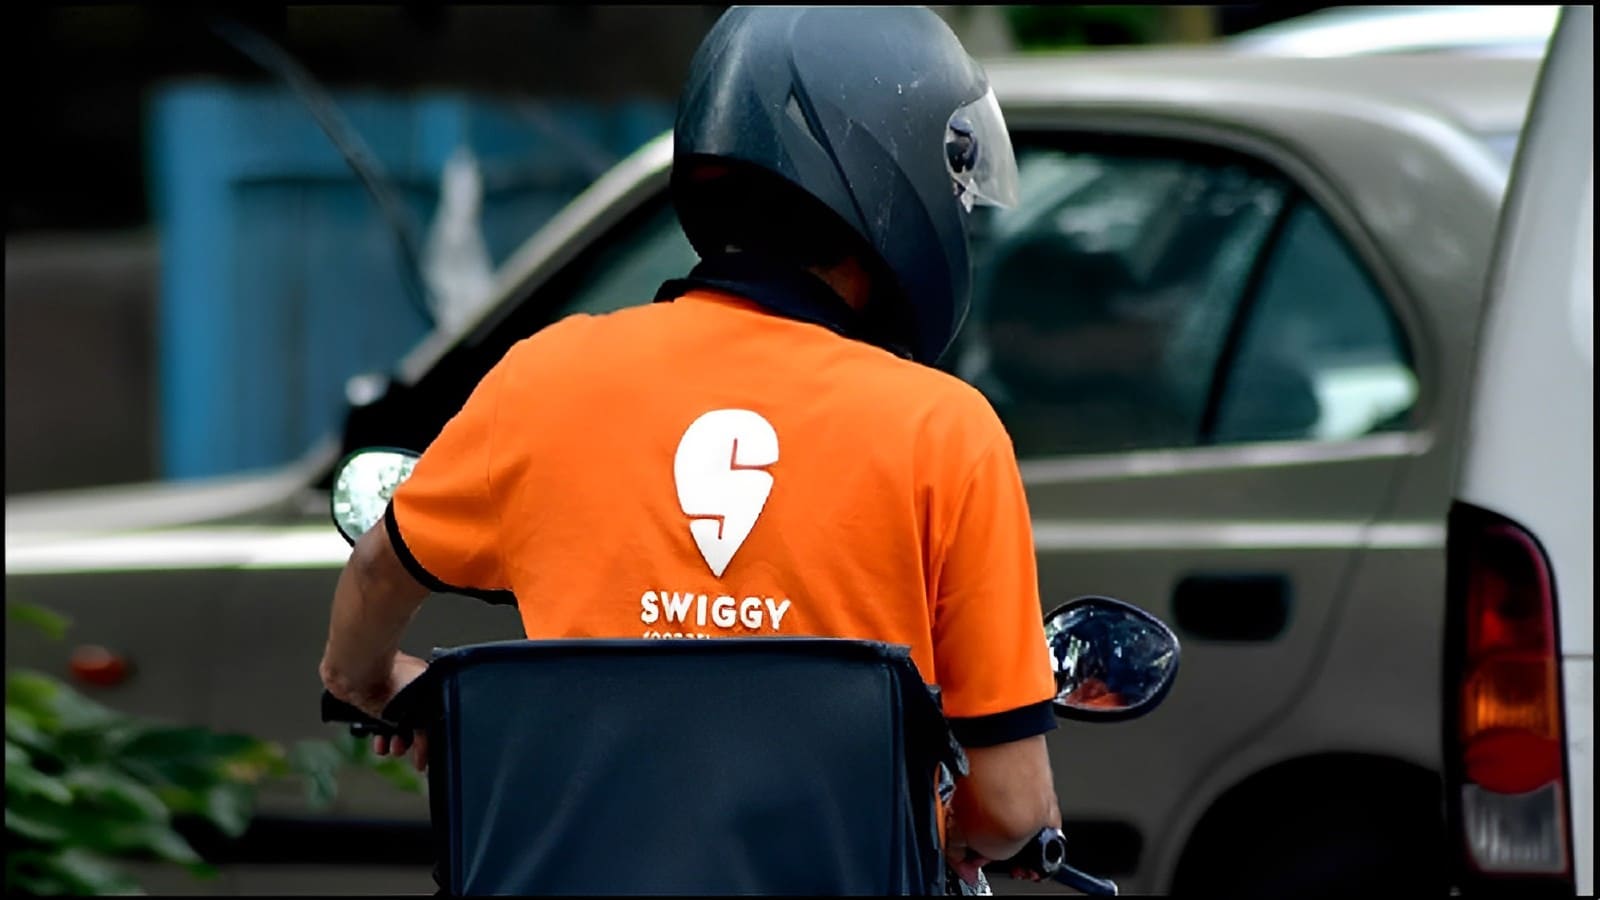 Food Delivery Giant Swiggy Prepares for IPO Debut